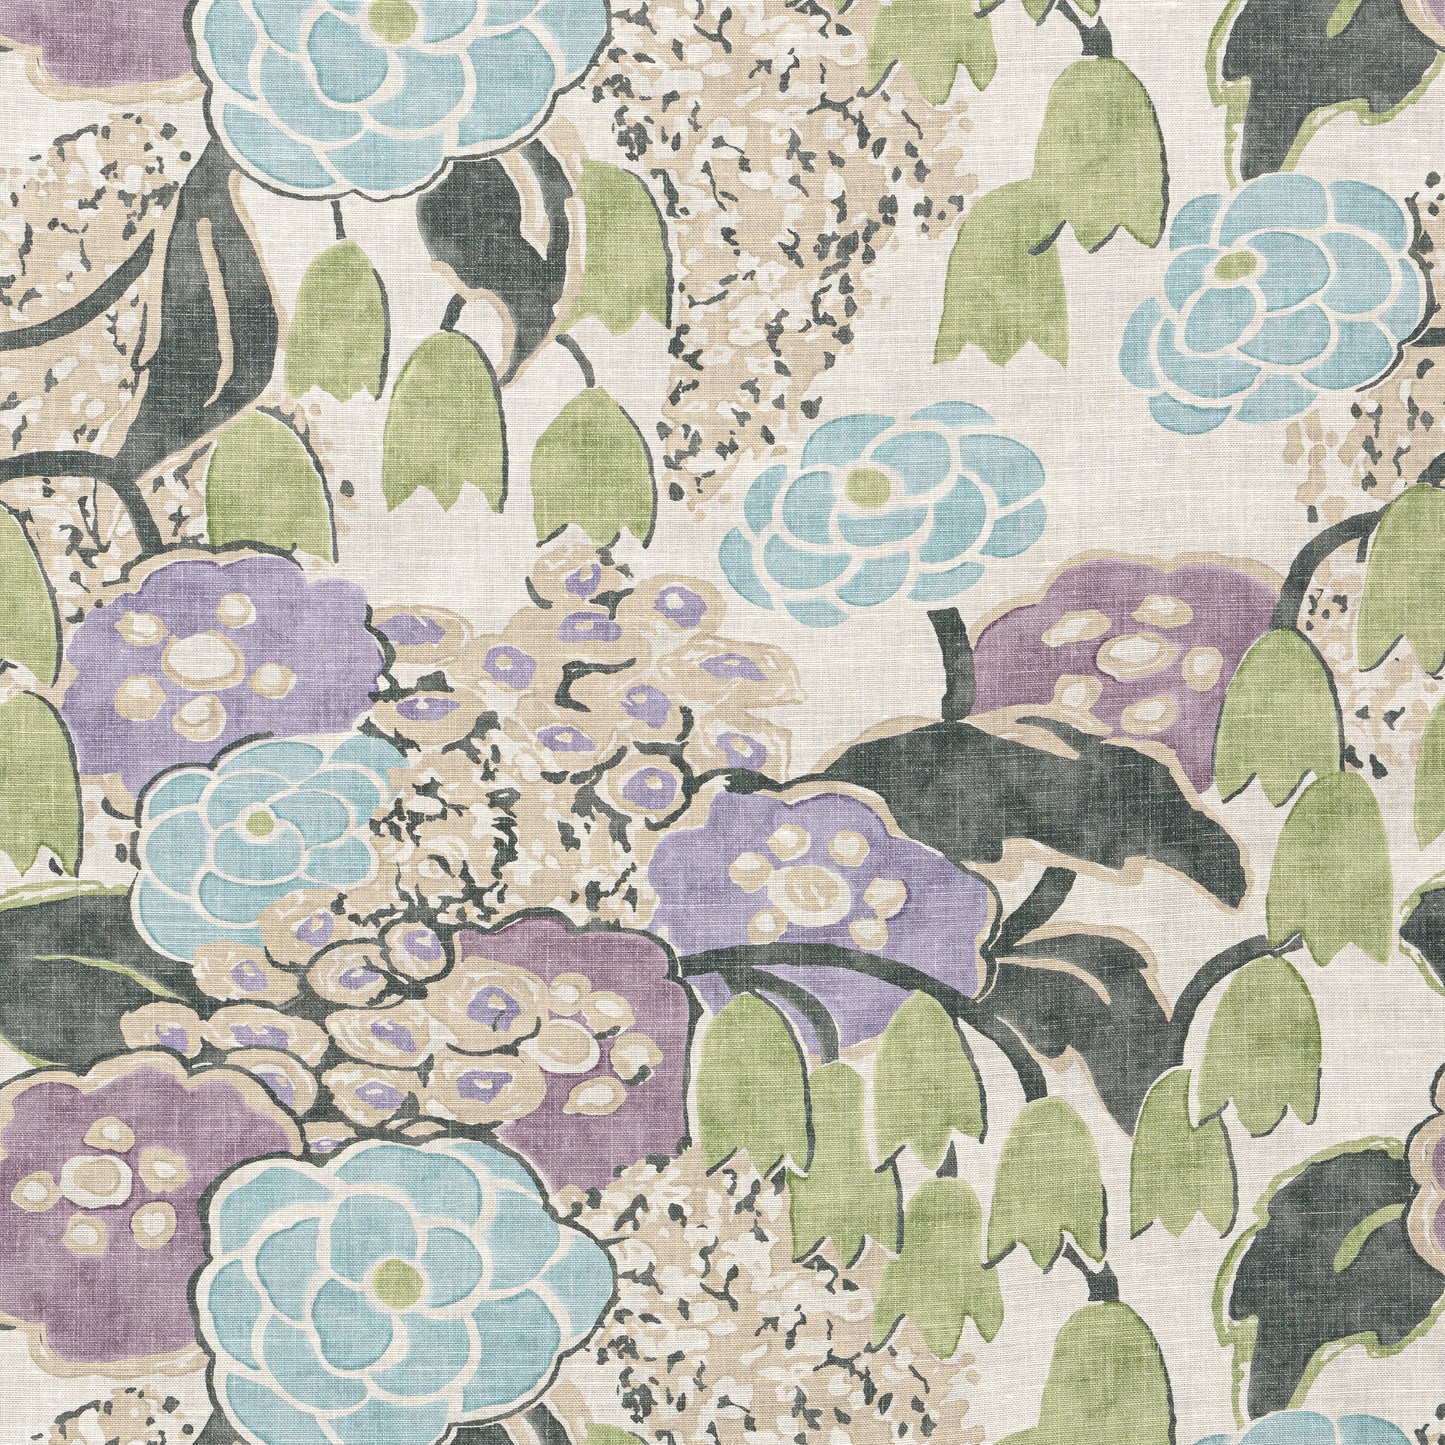 Purchase  Ann French Fabric Pattern number AF23101  pattern name  Laura